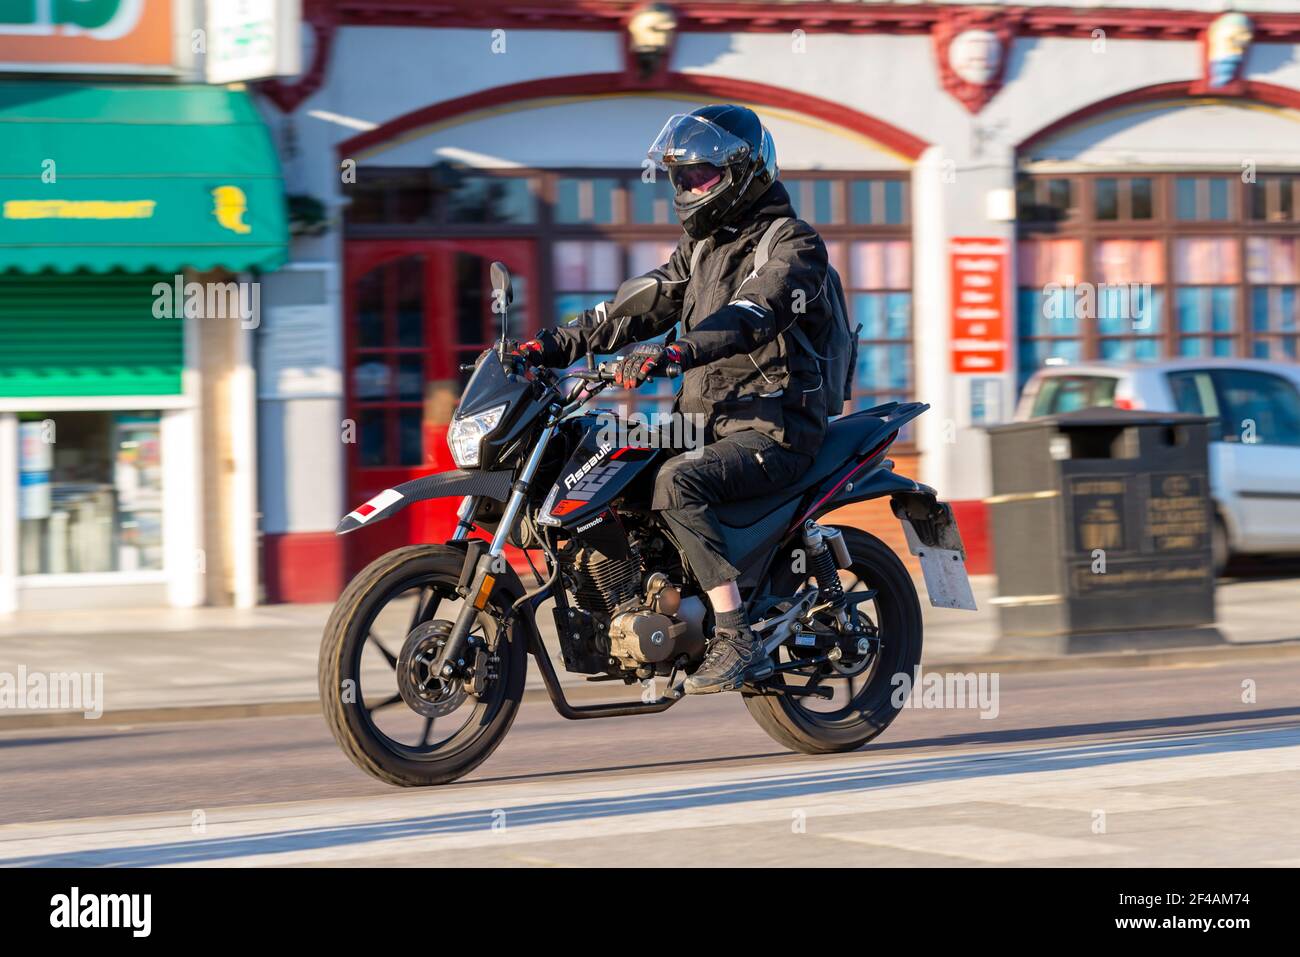 Lexmoto Assault 125 motorcycle being ridden in Southend on Sea, Essex, UK. Chinese import budget motorbike Stock Photo